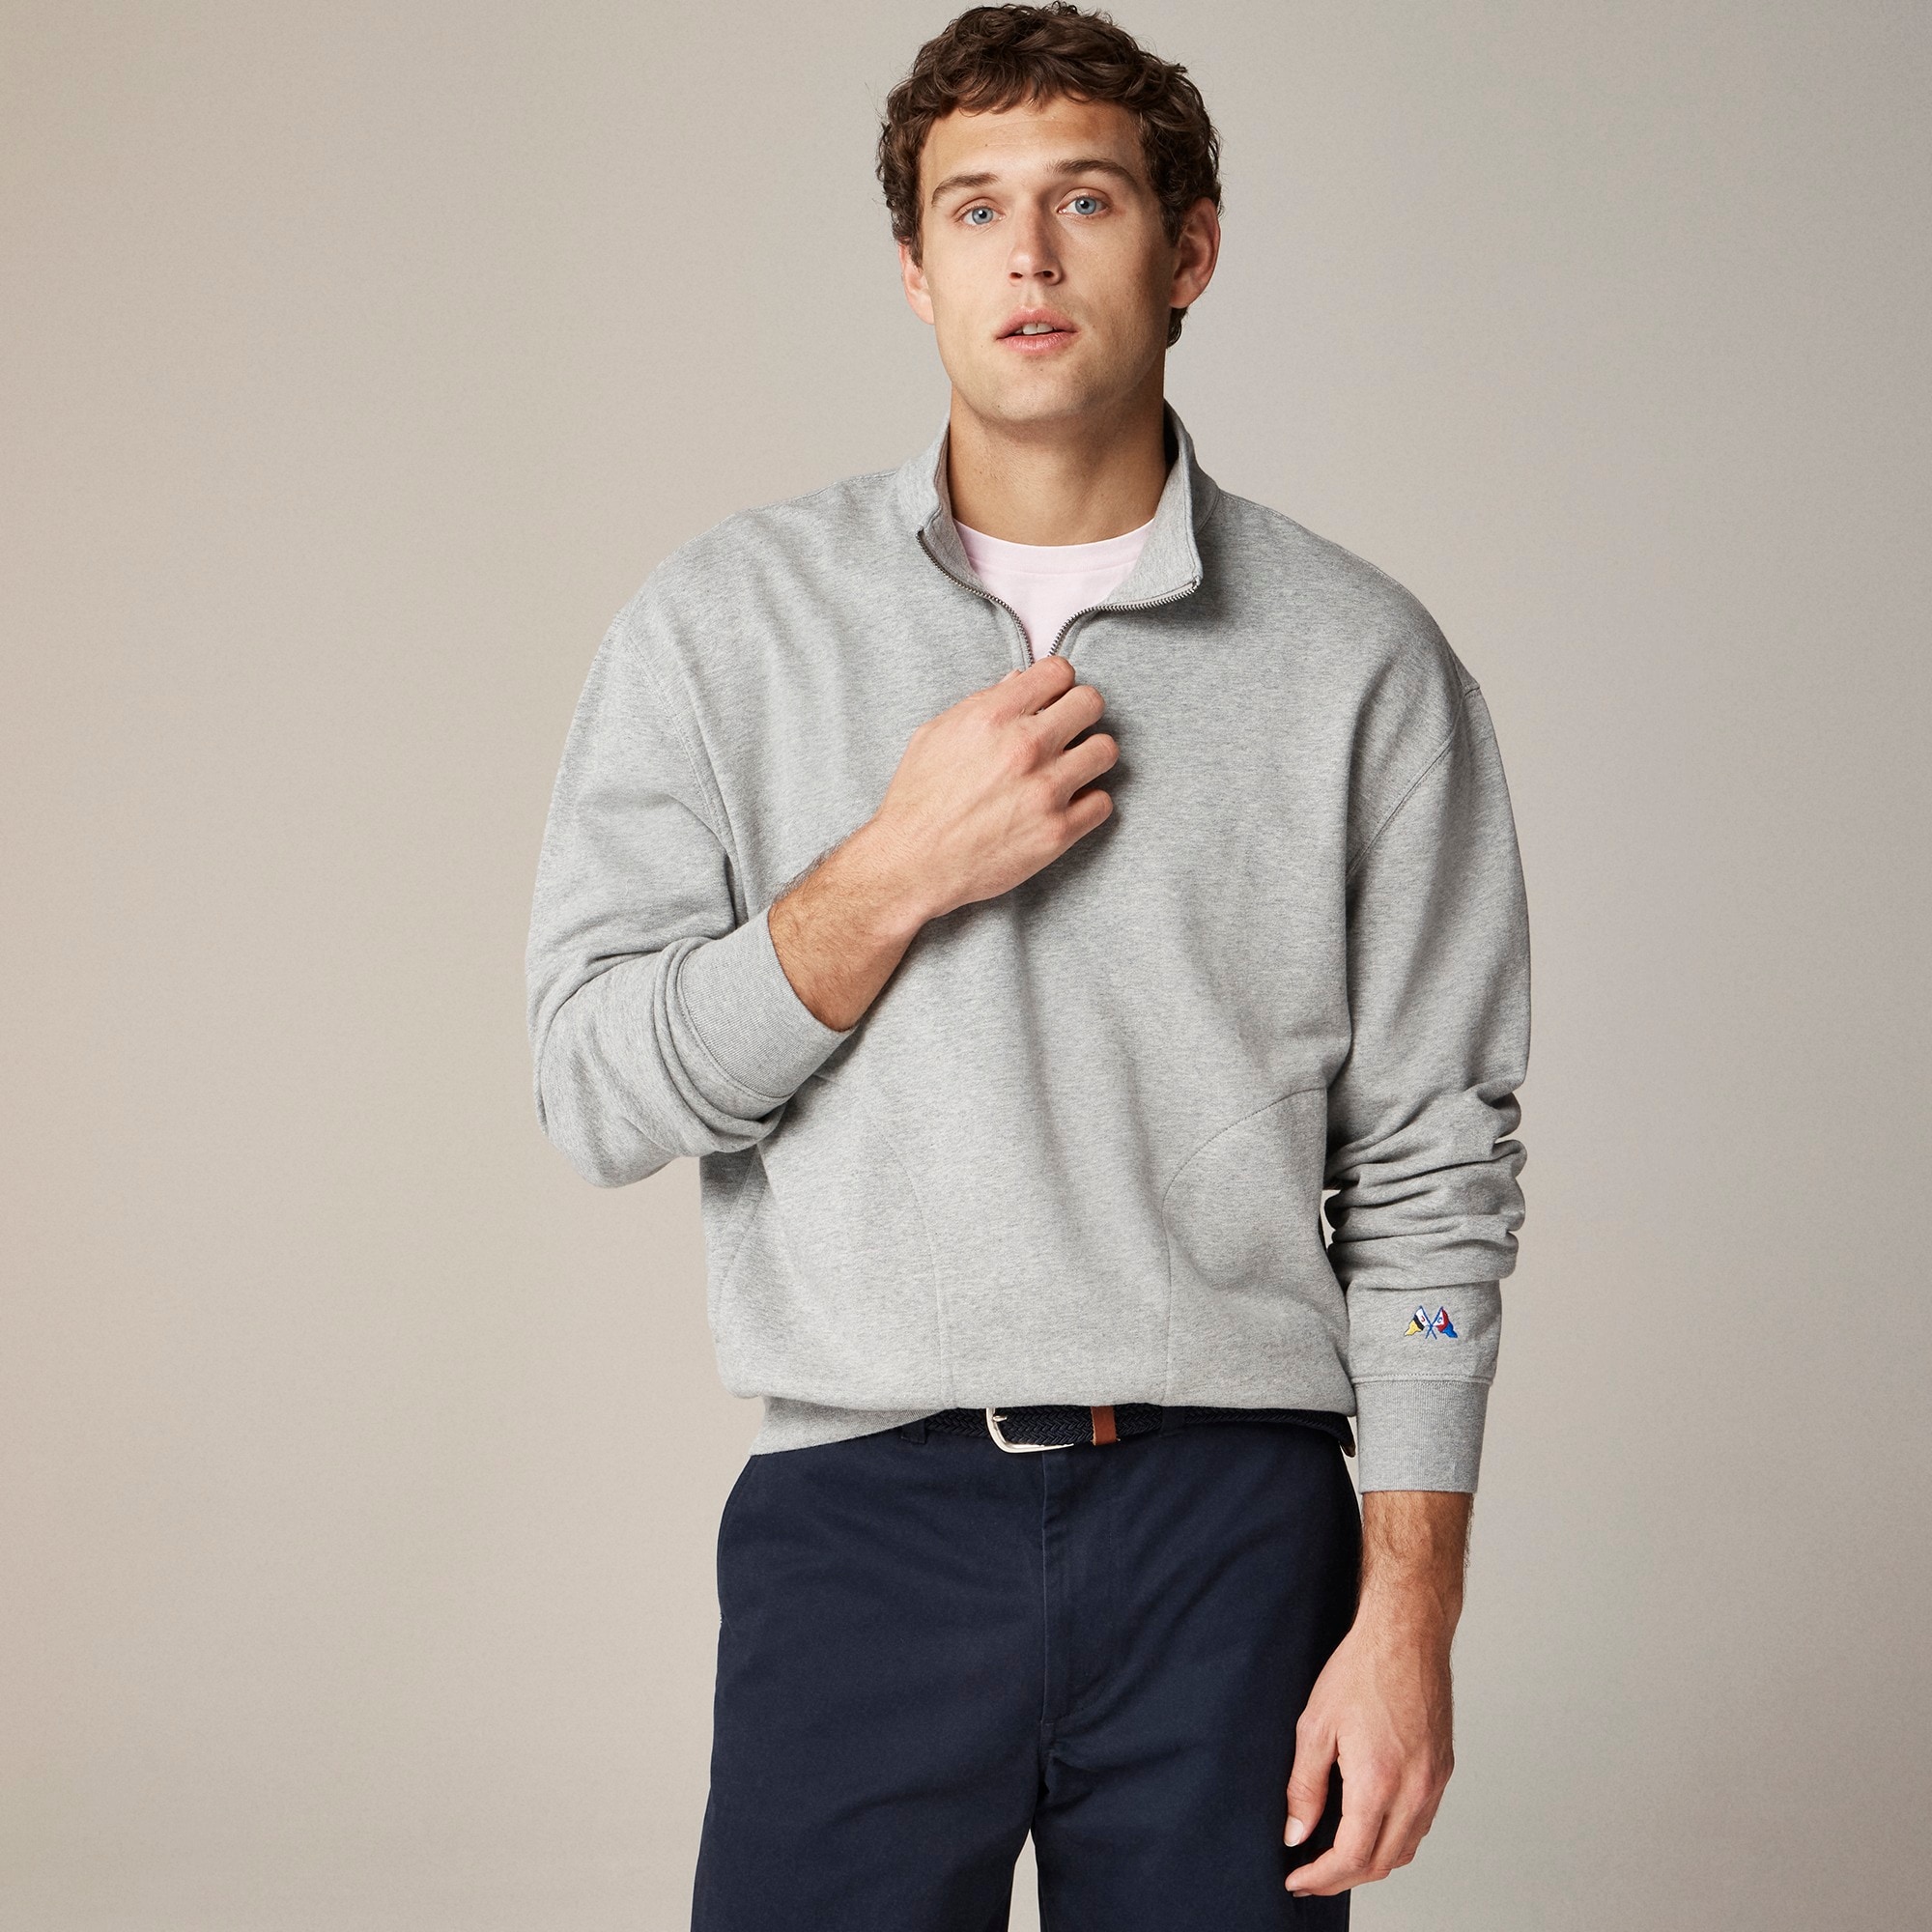 mens Relaxed-fit lightweight french terry quarter-zip sweatshirt